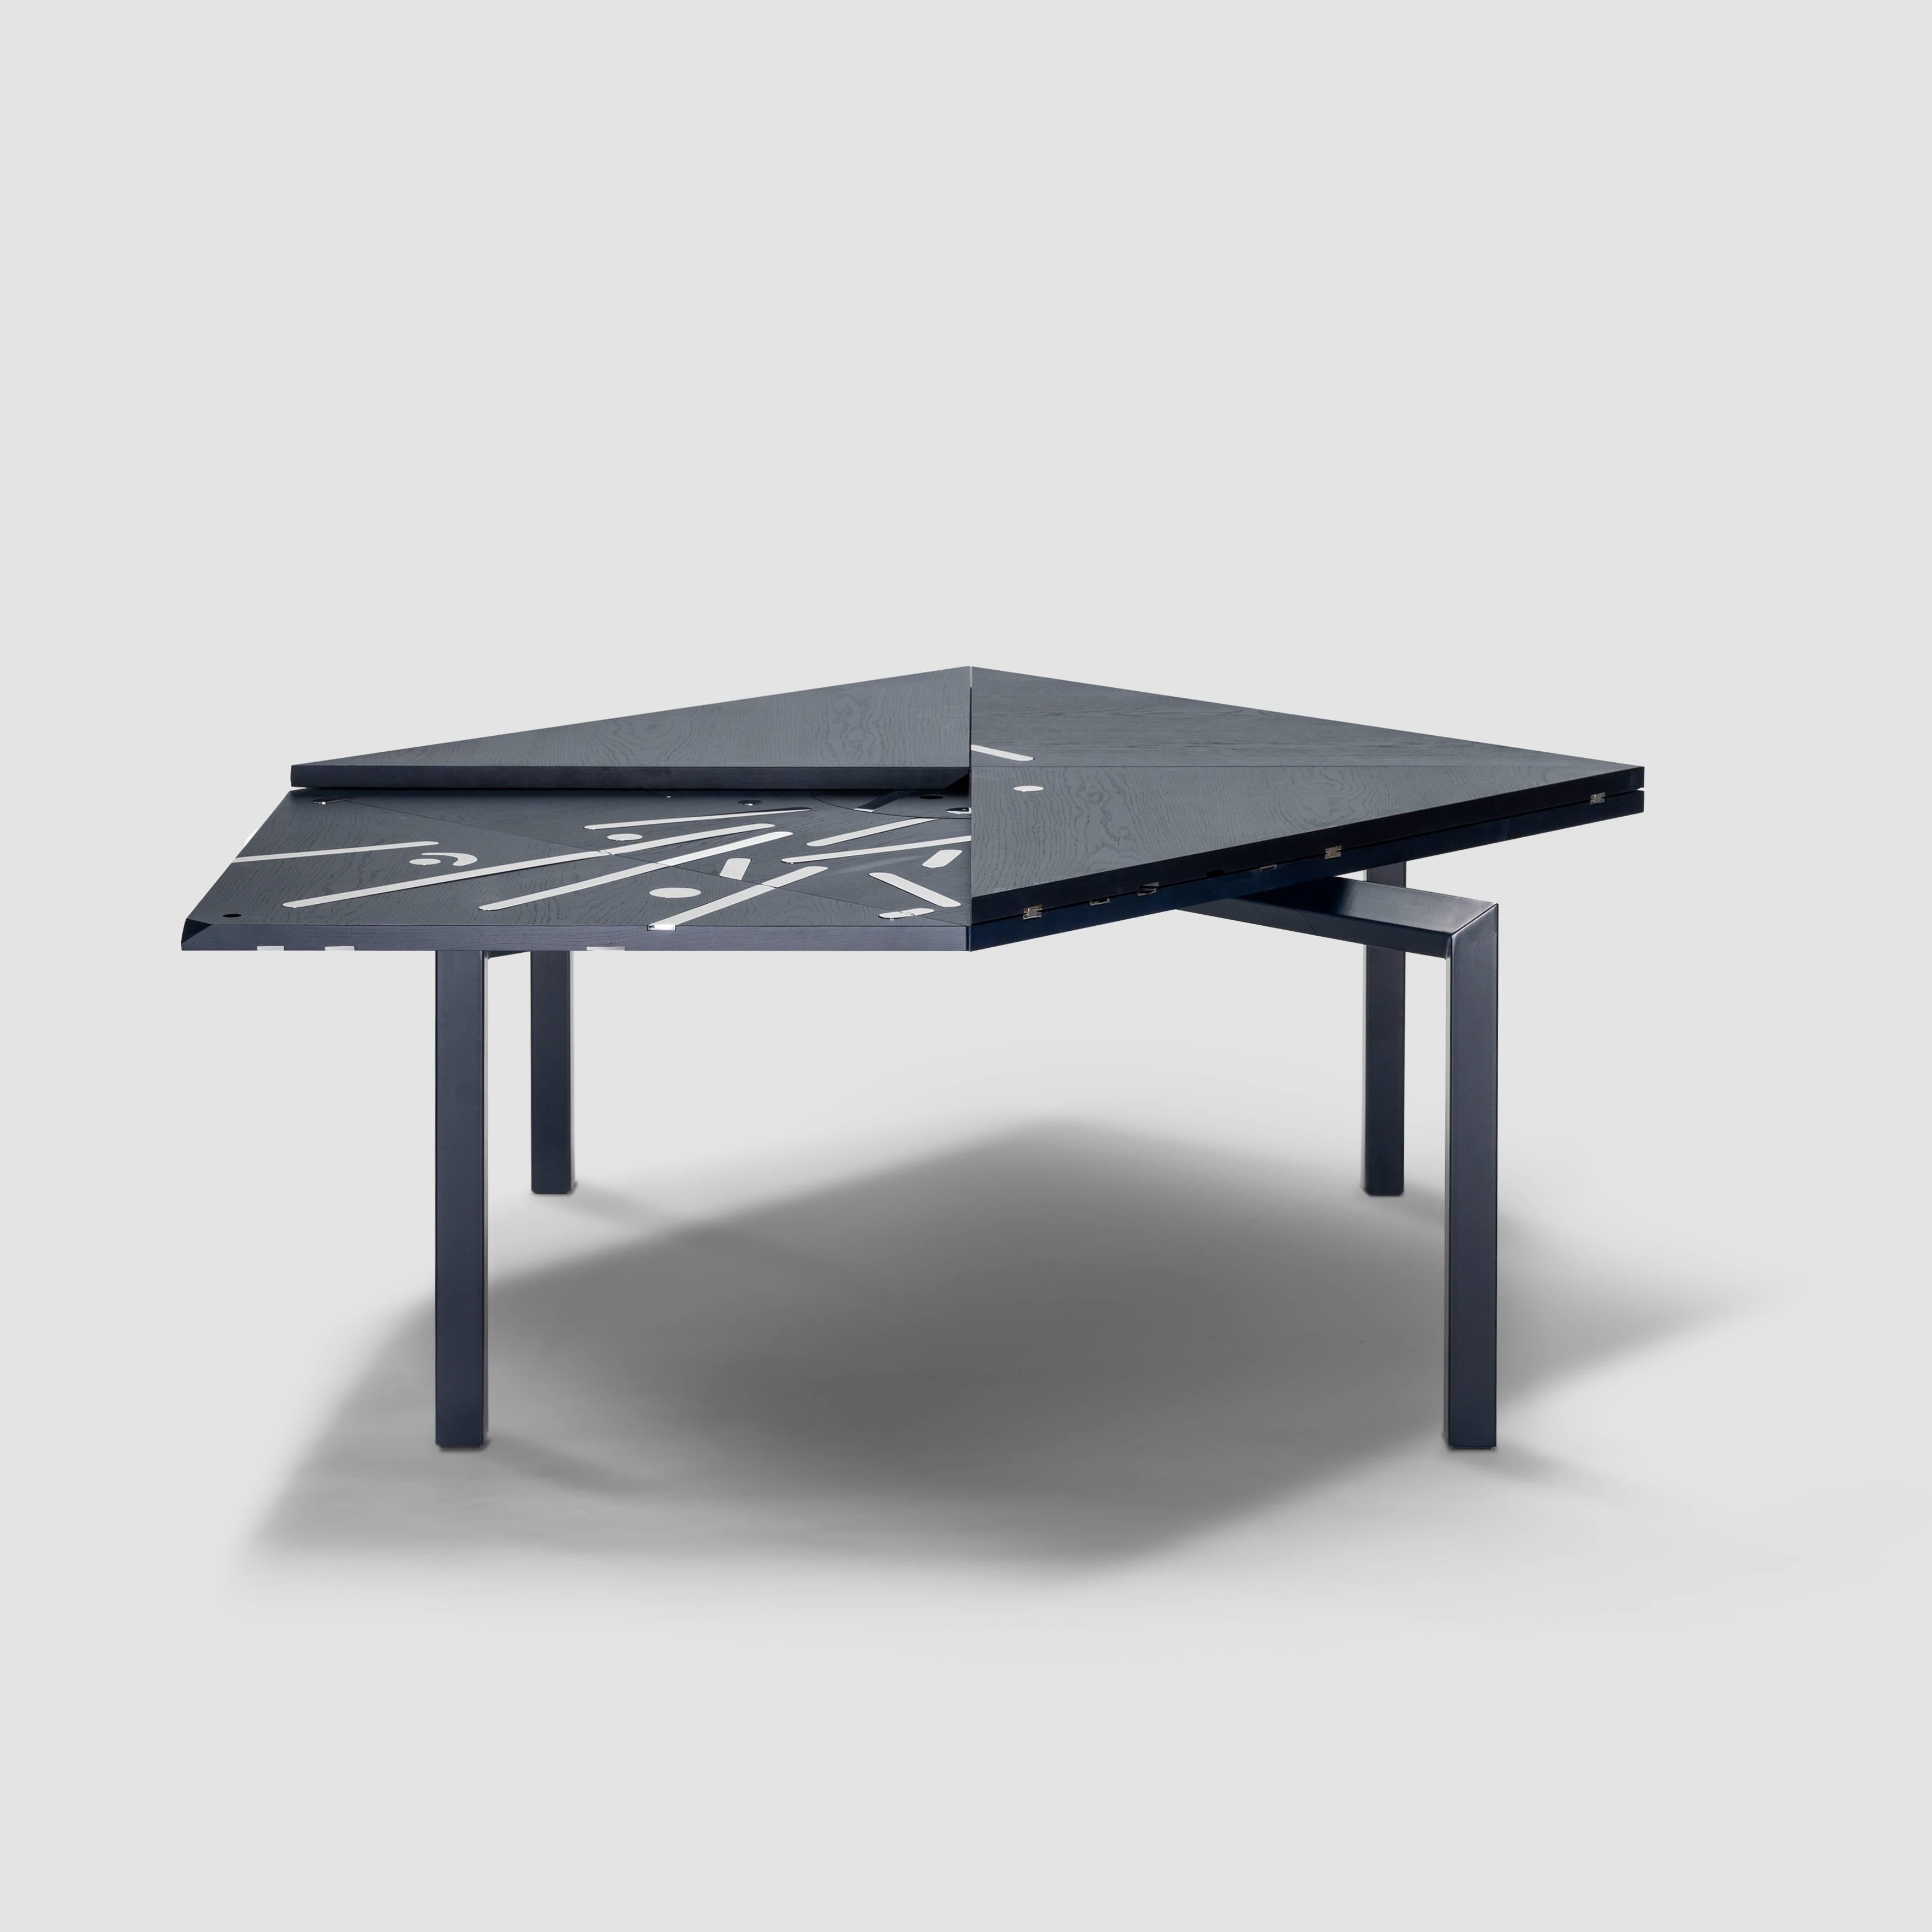 Spanish Limited Edition Alella Table by Lluís Clotet for BD For Sale